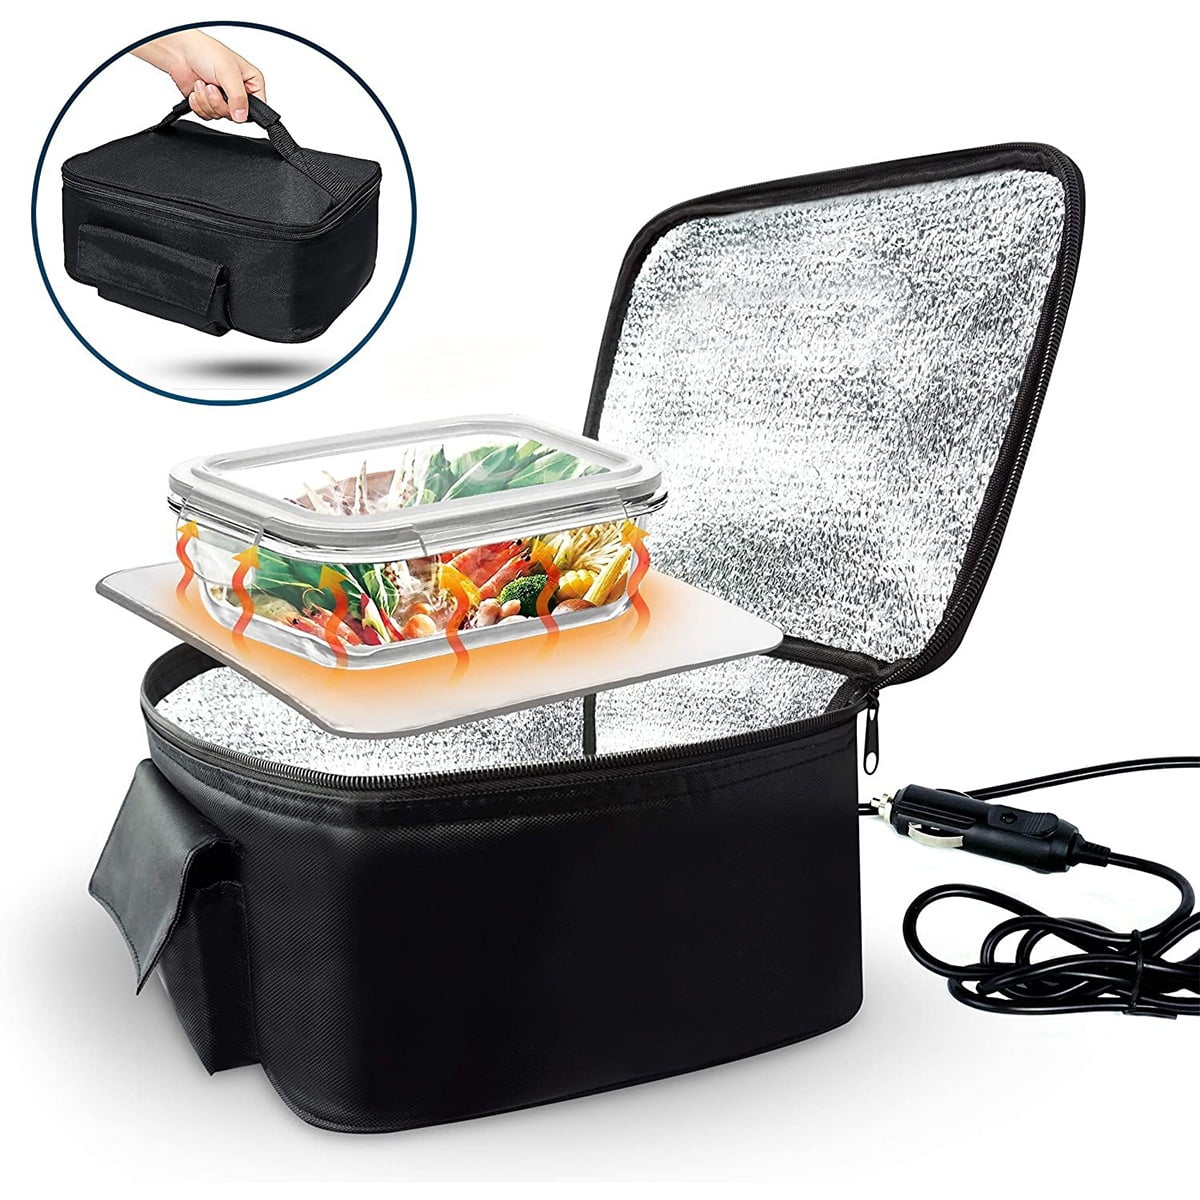 Portable 12V Car Travel Camping Food Warmer Heater Lunch Box Electric Oven Bag 